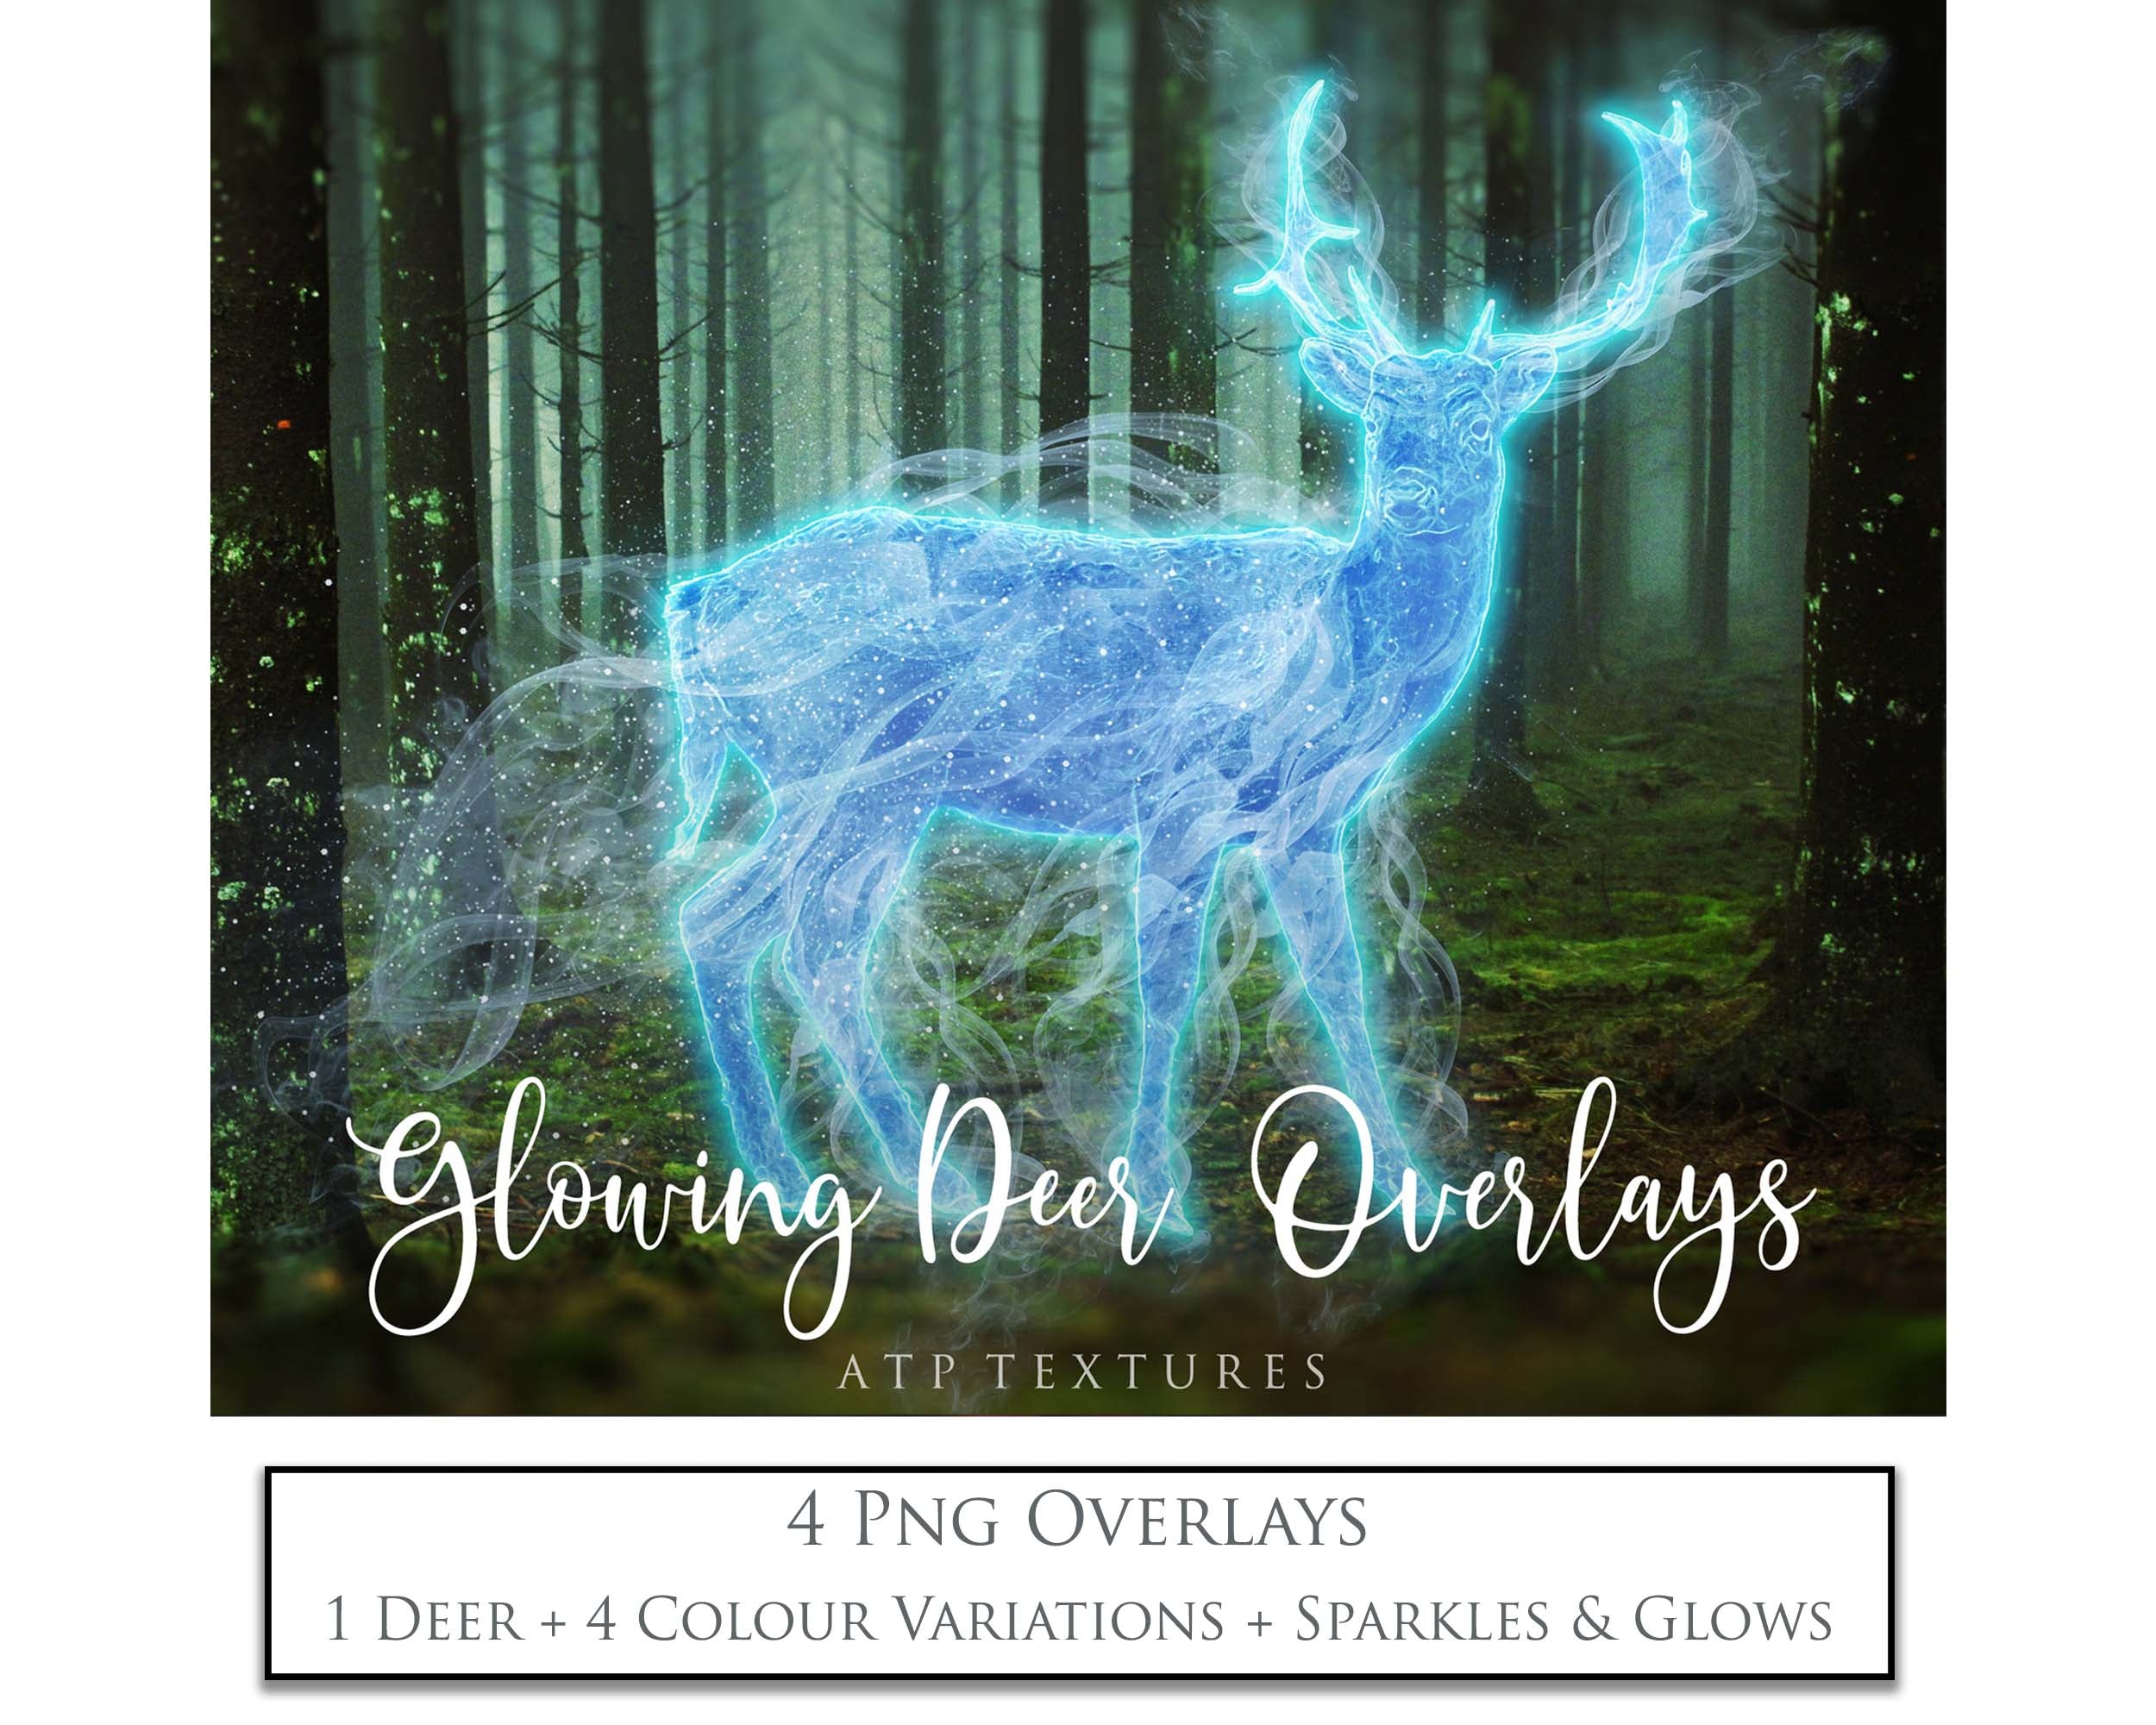 Overlays. Png deer style with 4 colour variations. A total of 16 png overlays. 1 PSD template and Video tutorial. ATP Textures. Graphic Assets and digital art design for Photographers.